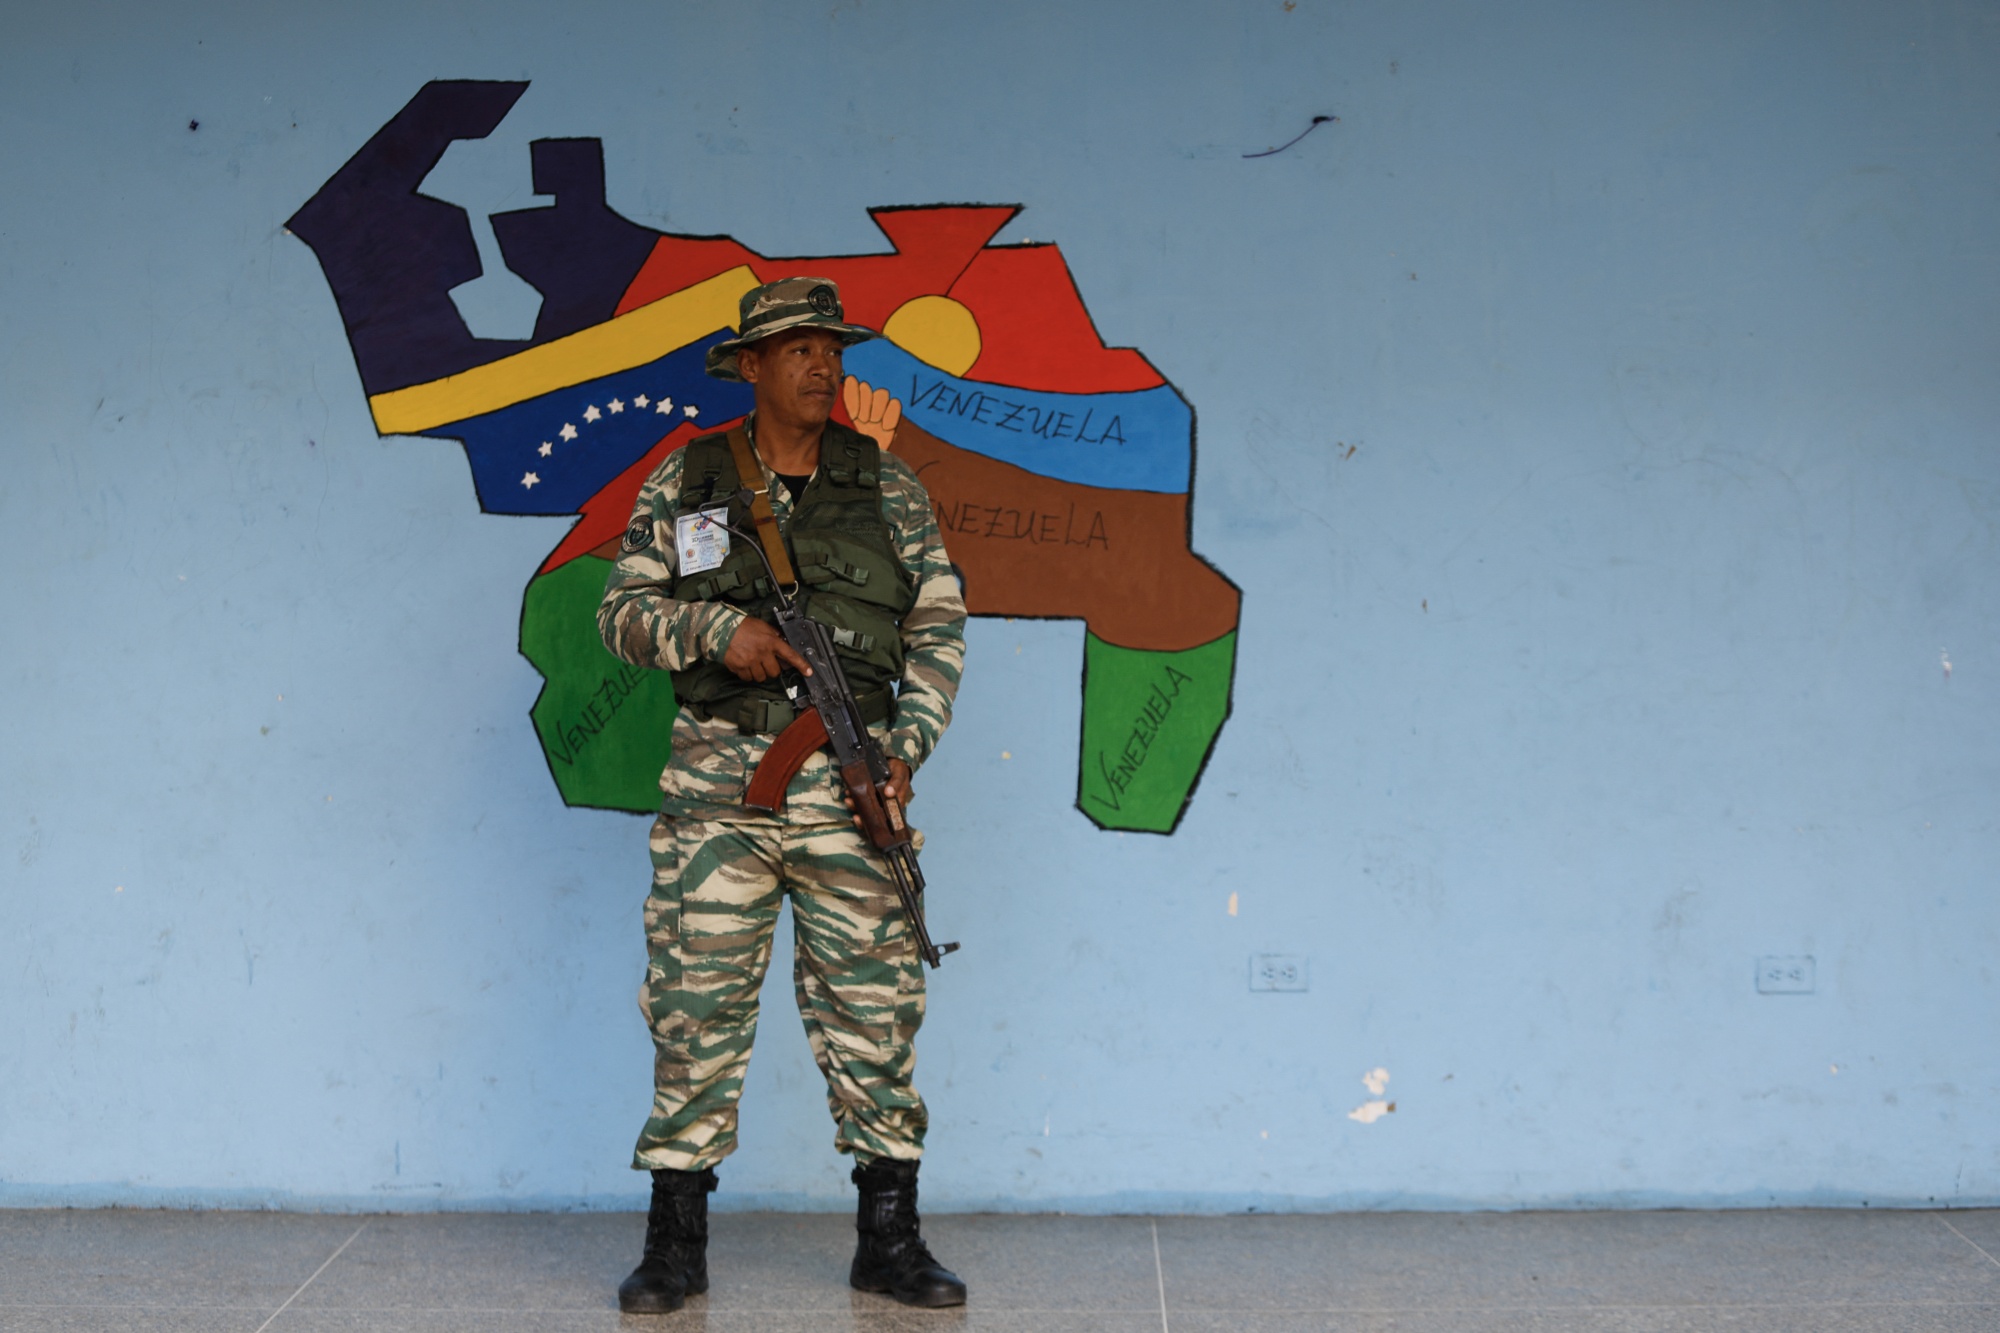 A member of a militia group stands guard at a polling station during the&nbsp;referendum on Venezuelan control&nbsp;over the Essequibo region of Guyana, in Caracas in Dec. 2023.